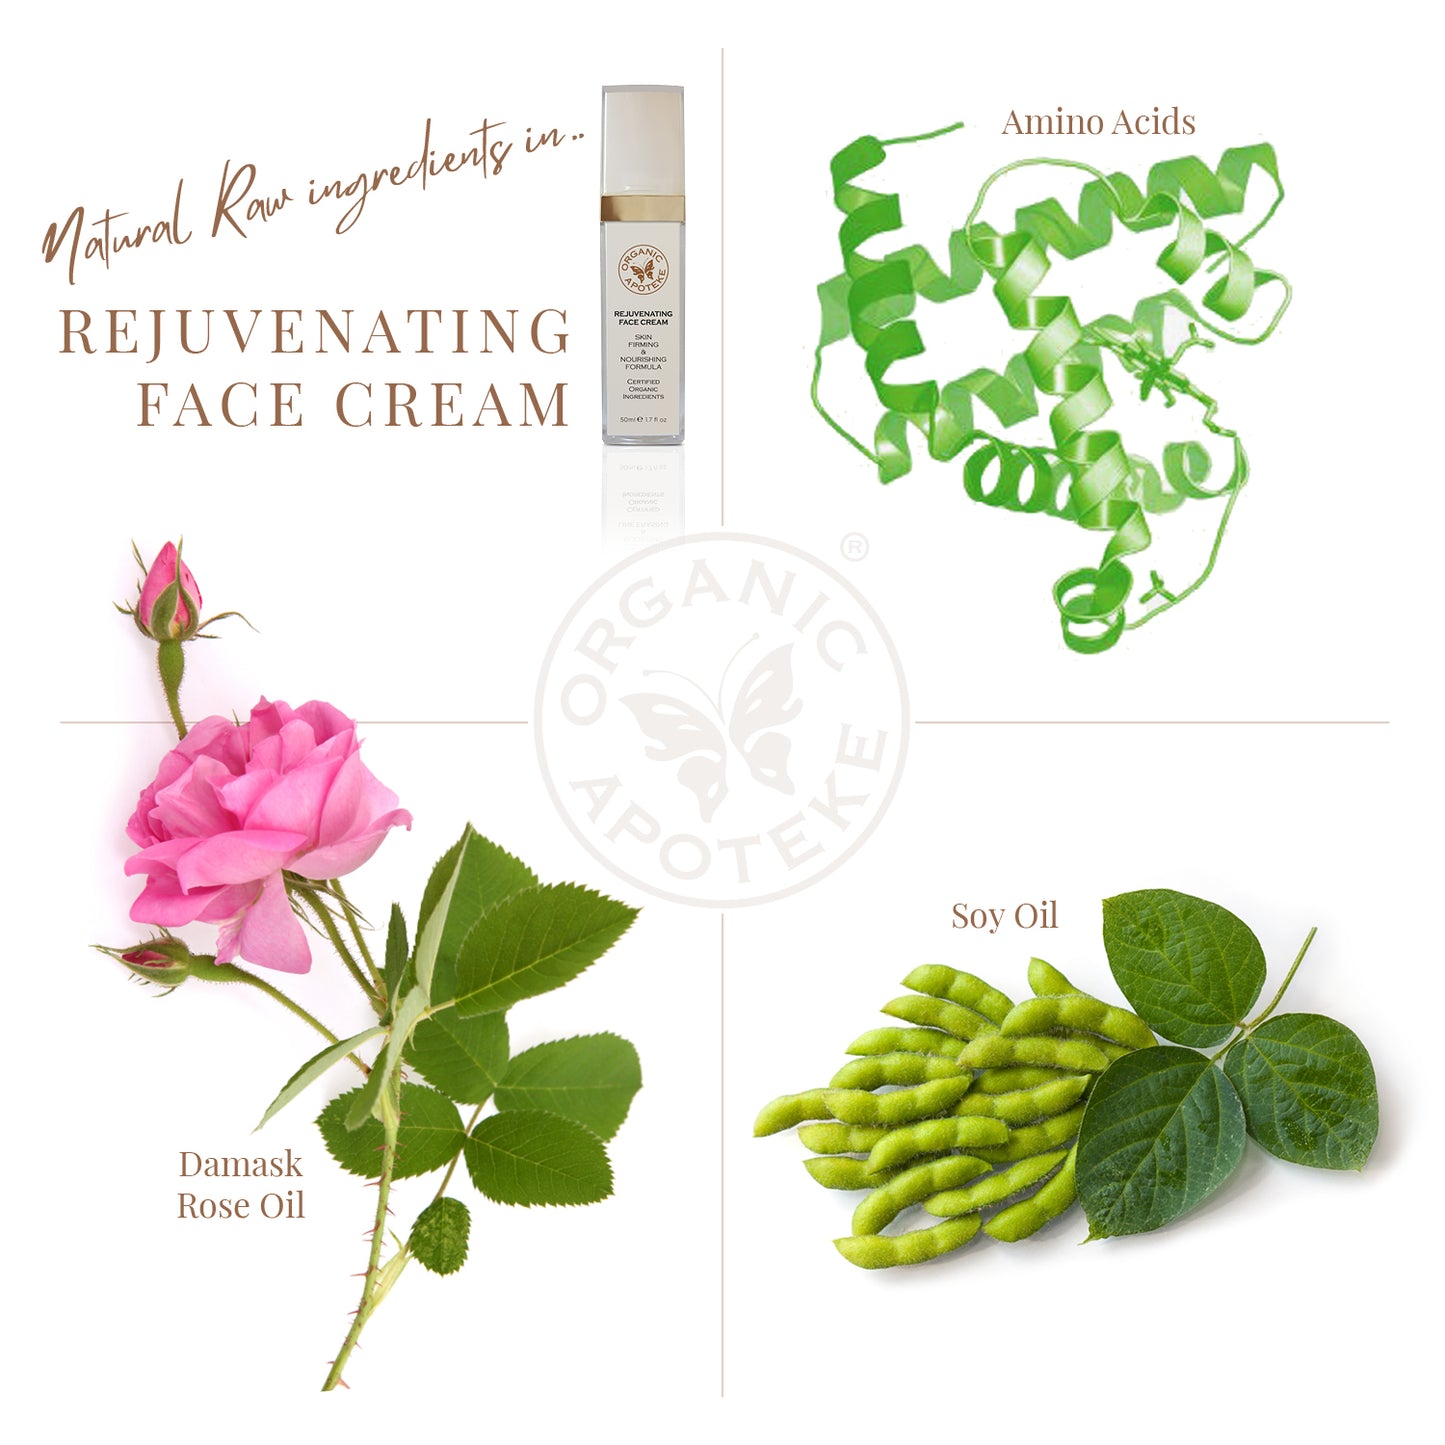 Age Defying Facial - 3 products for Total Skin Rejuvenation